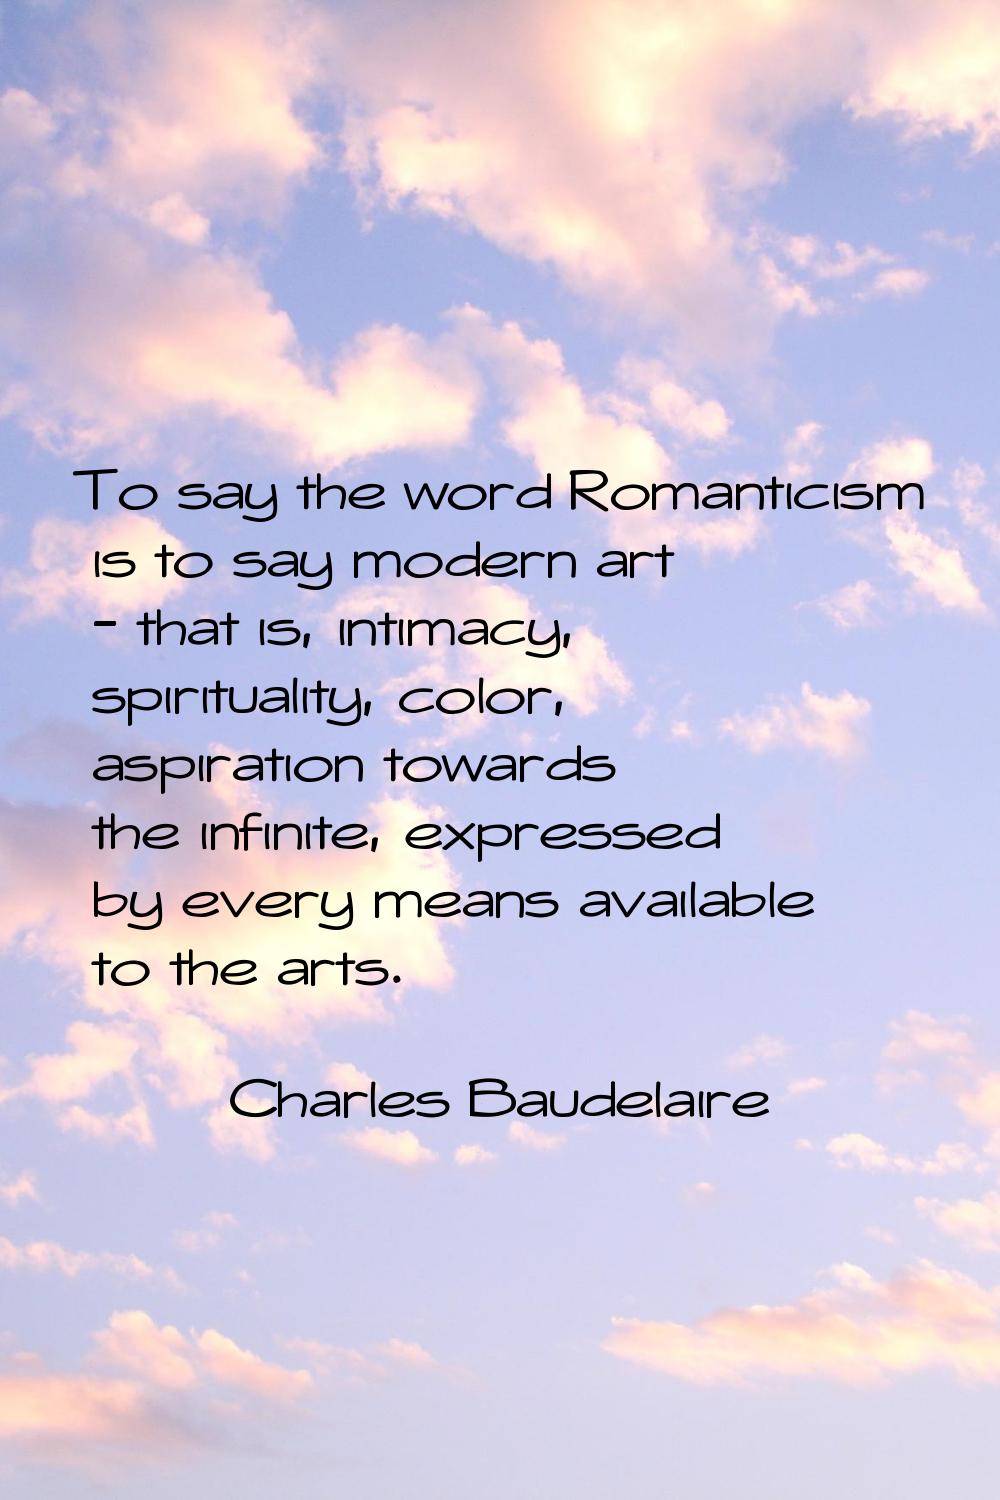 To say the word Romanticism is to say modern art - that is, intimacy, spirituality, color, aspirati